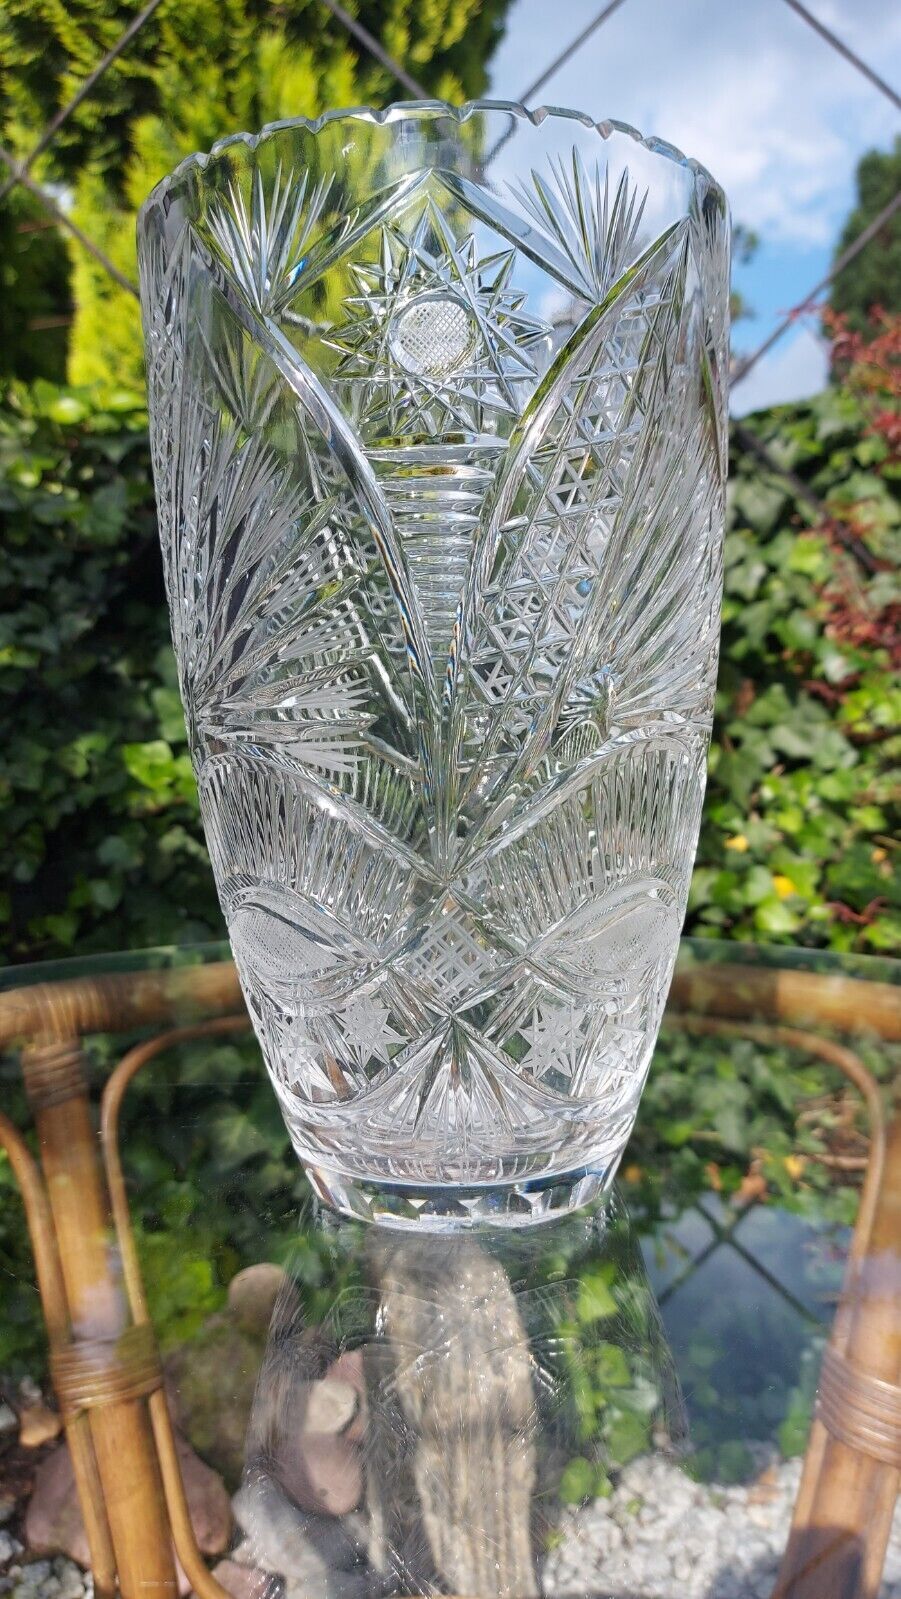 Lead crystal vase. Handmade in Poland in the 1970s